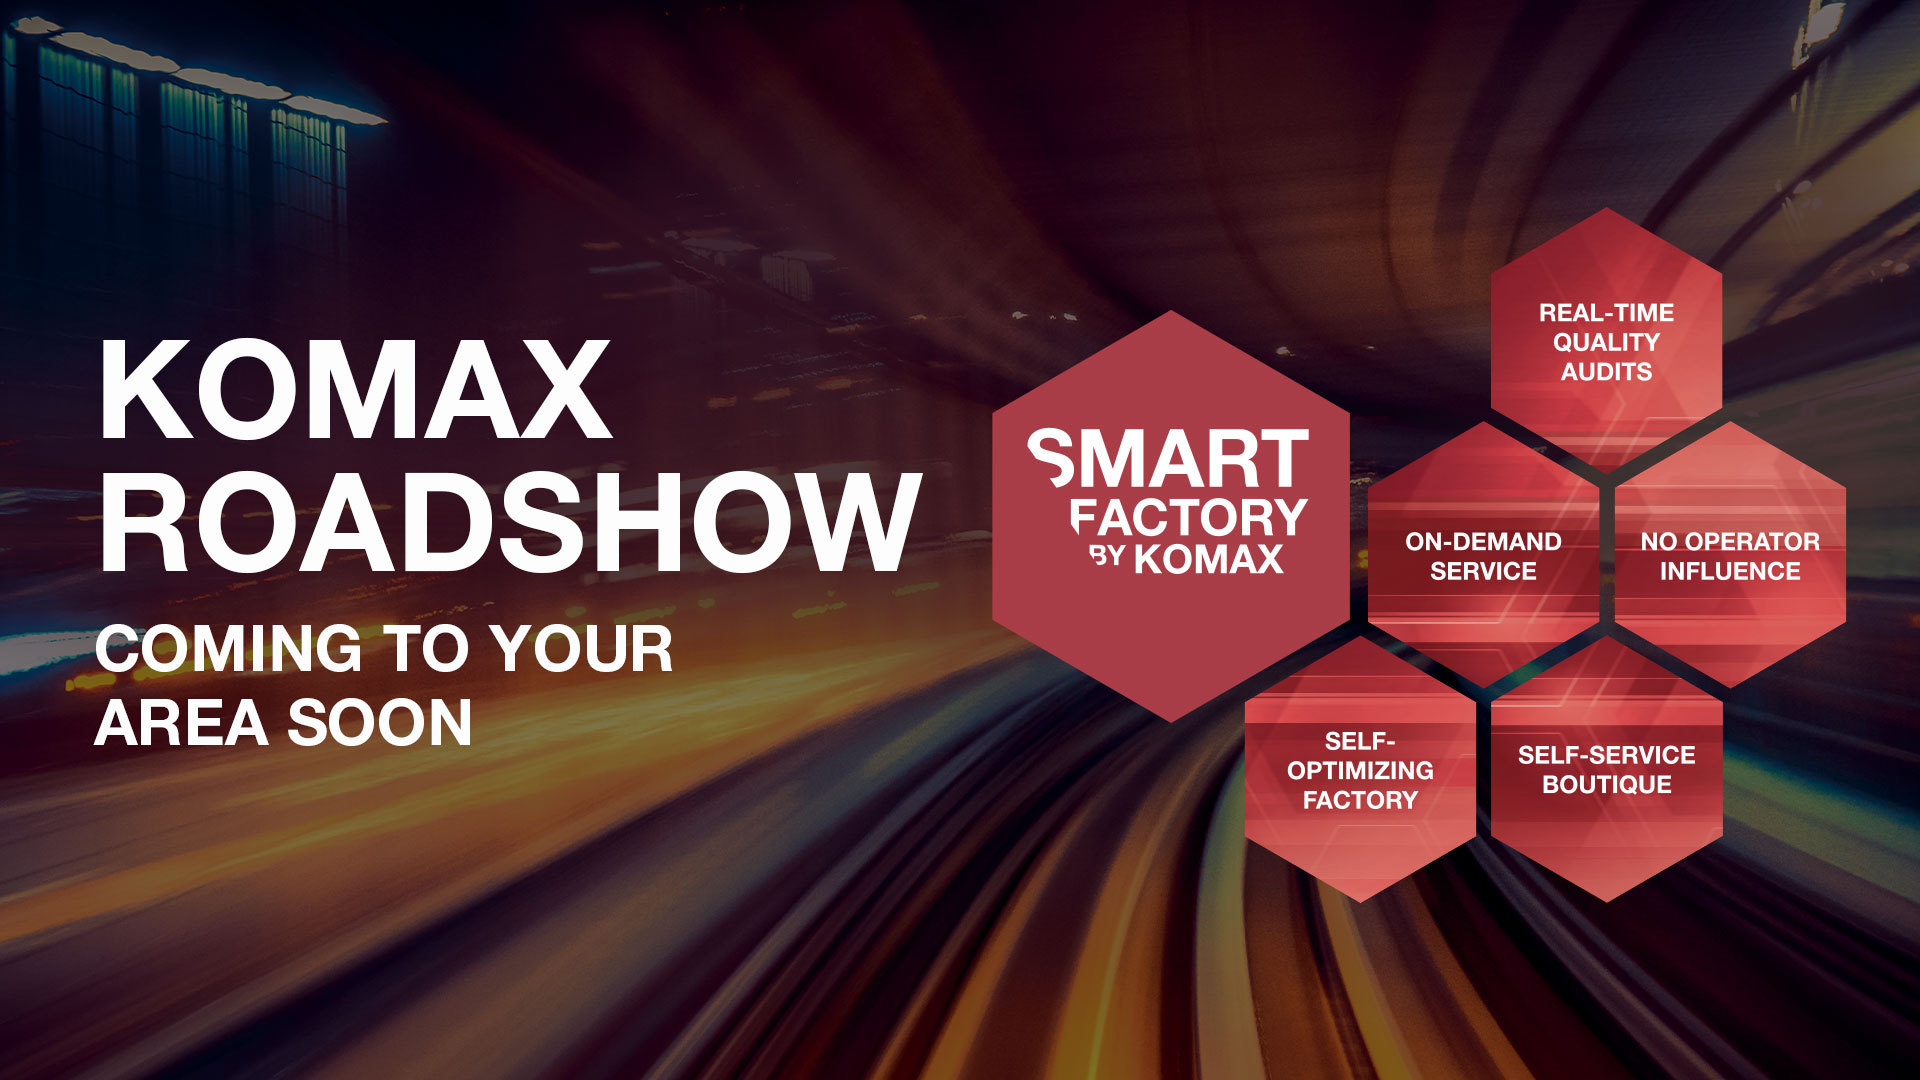 Komax Roadshow - coming to your area soon